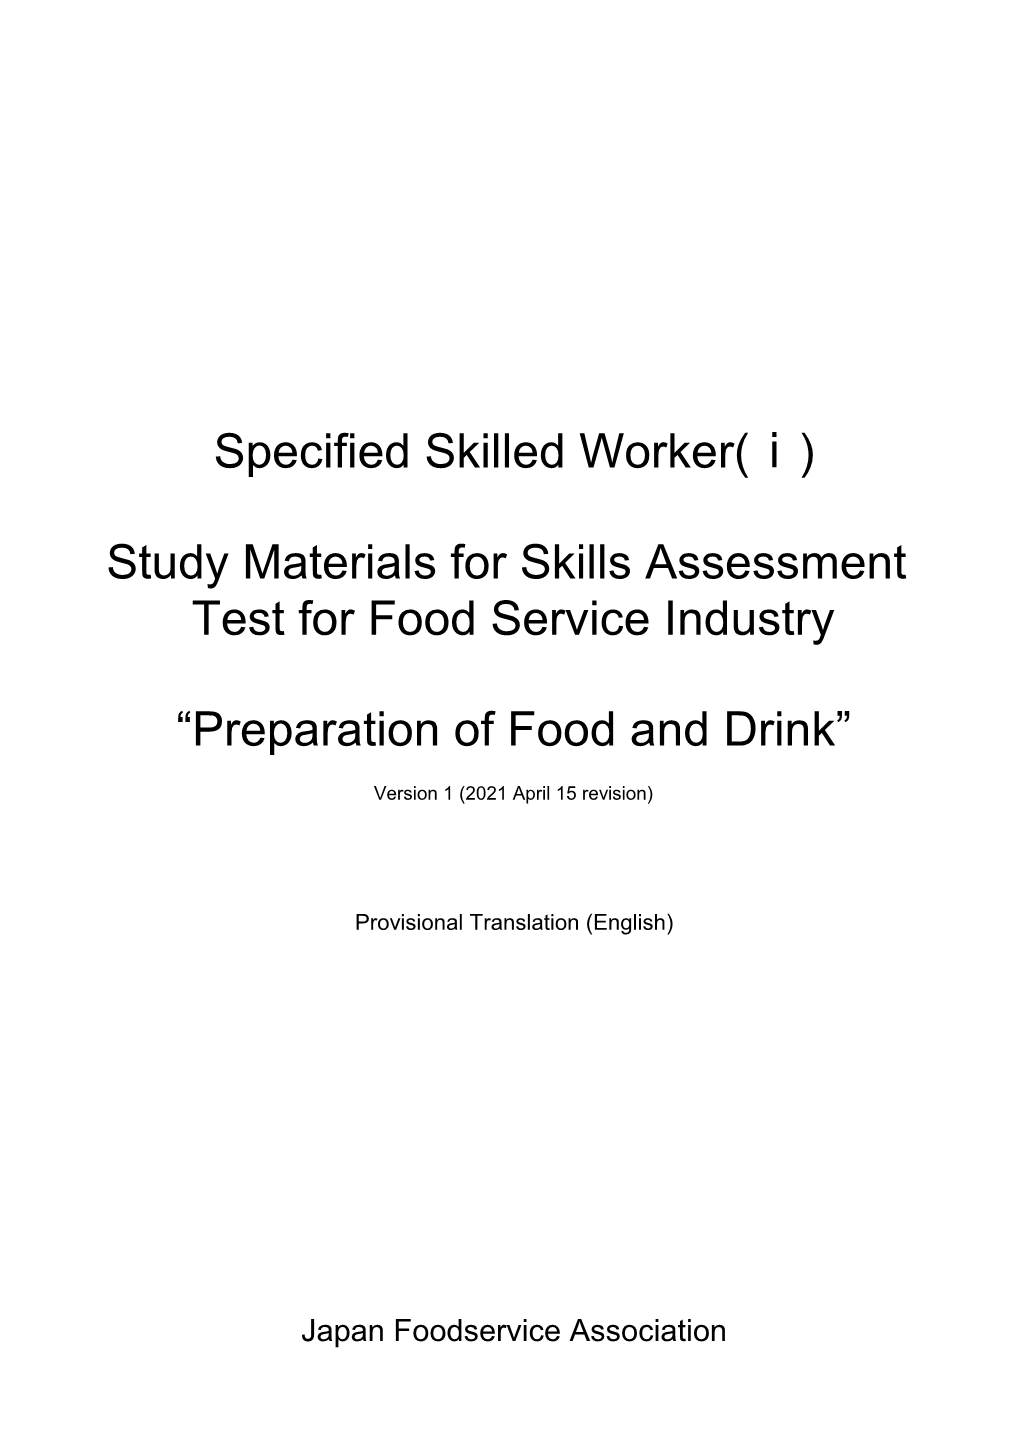 Study Materials for Skills Assessment Test for Food Service Industry “Preparation of Food and Drink” Specified Skilled Worke